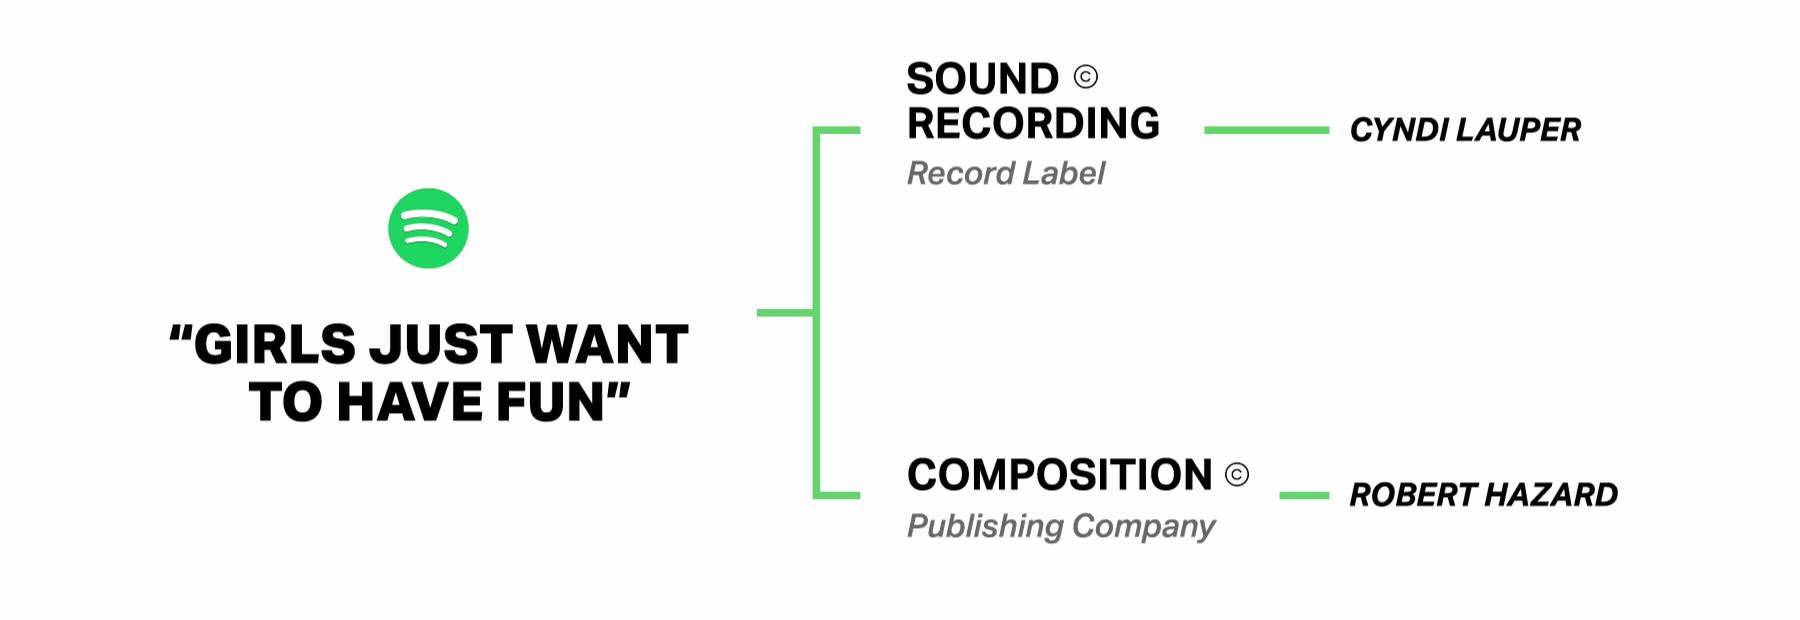 How licensing works for Spotify.